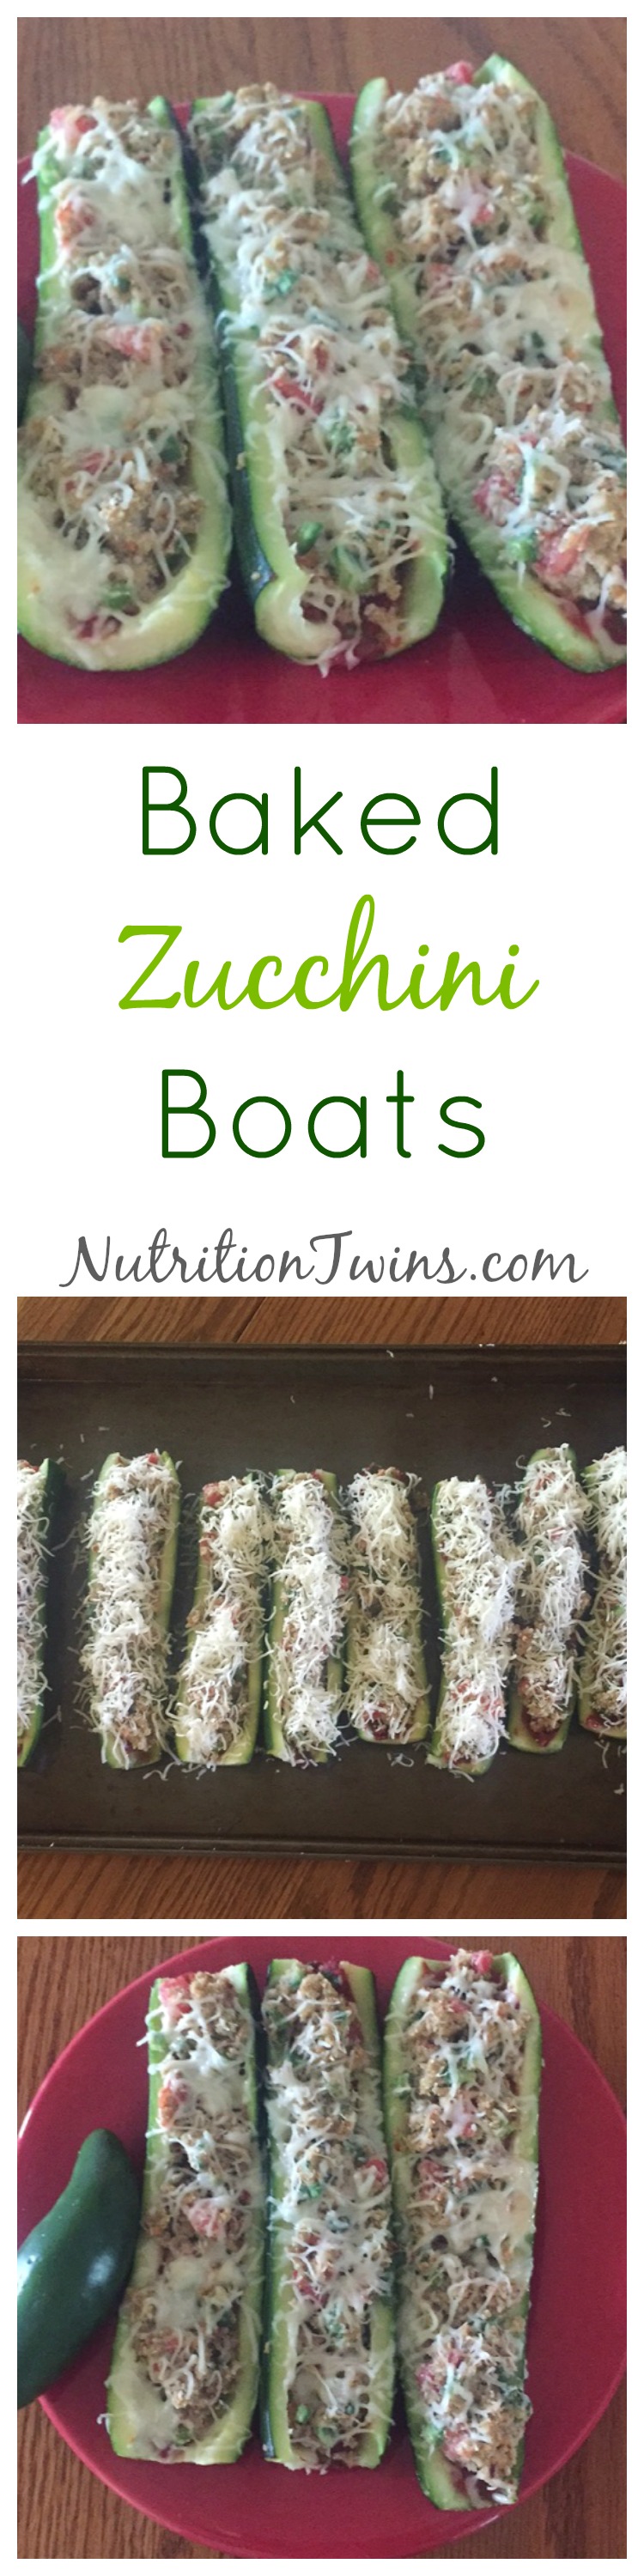 Baked_Zucchini_Boats_Collage